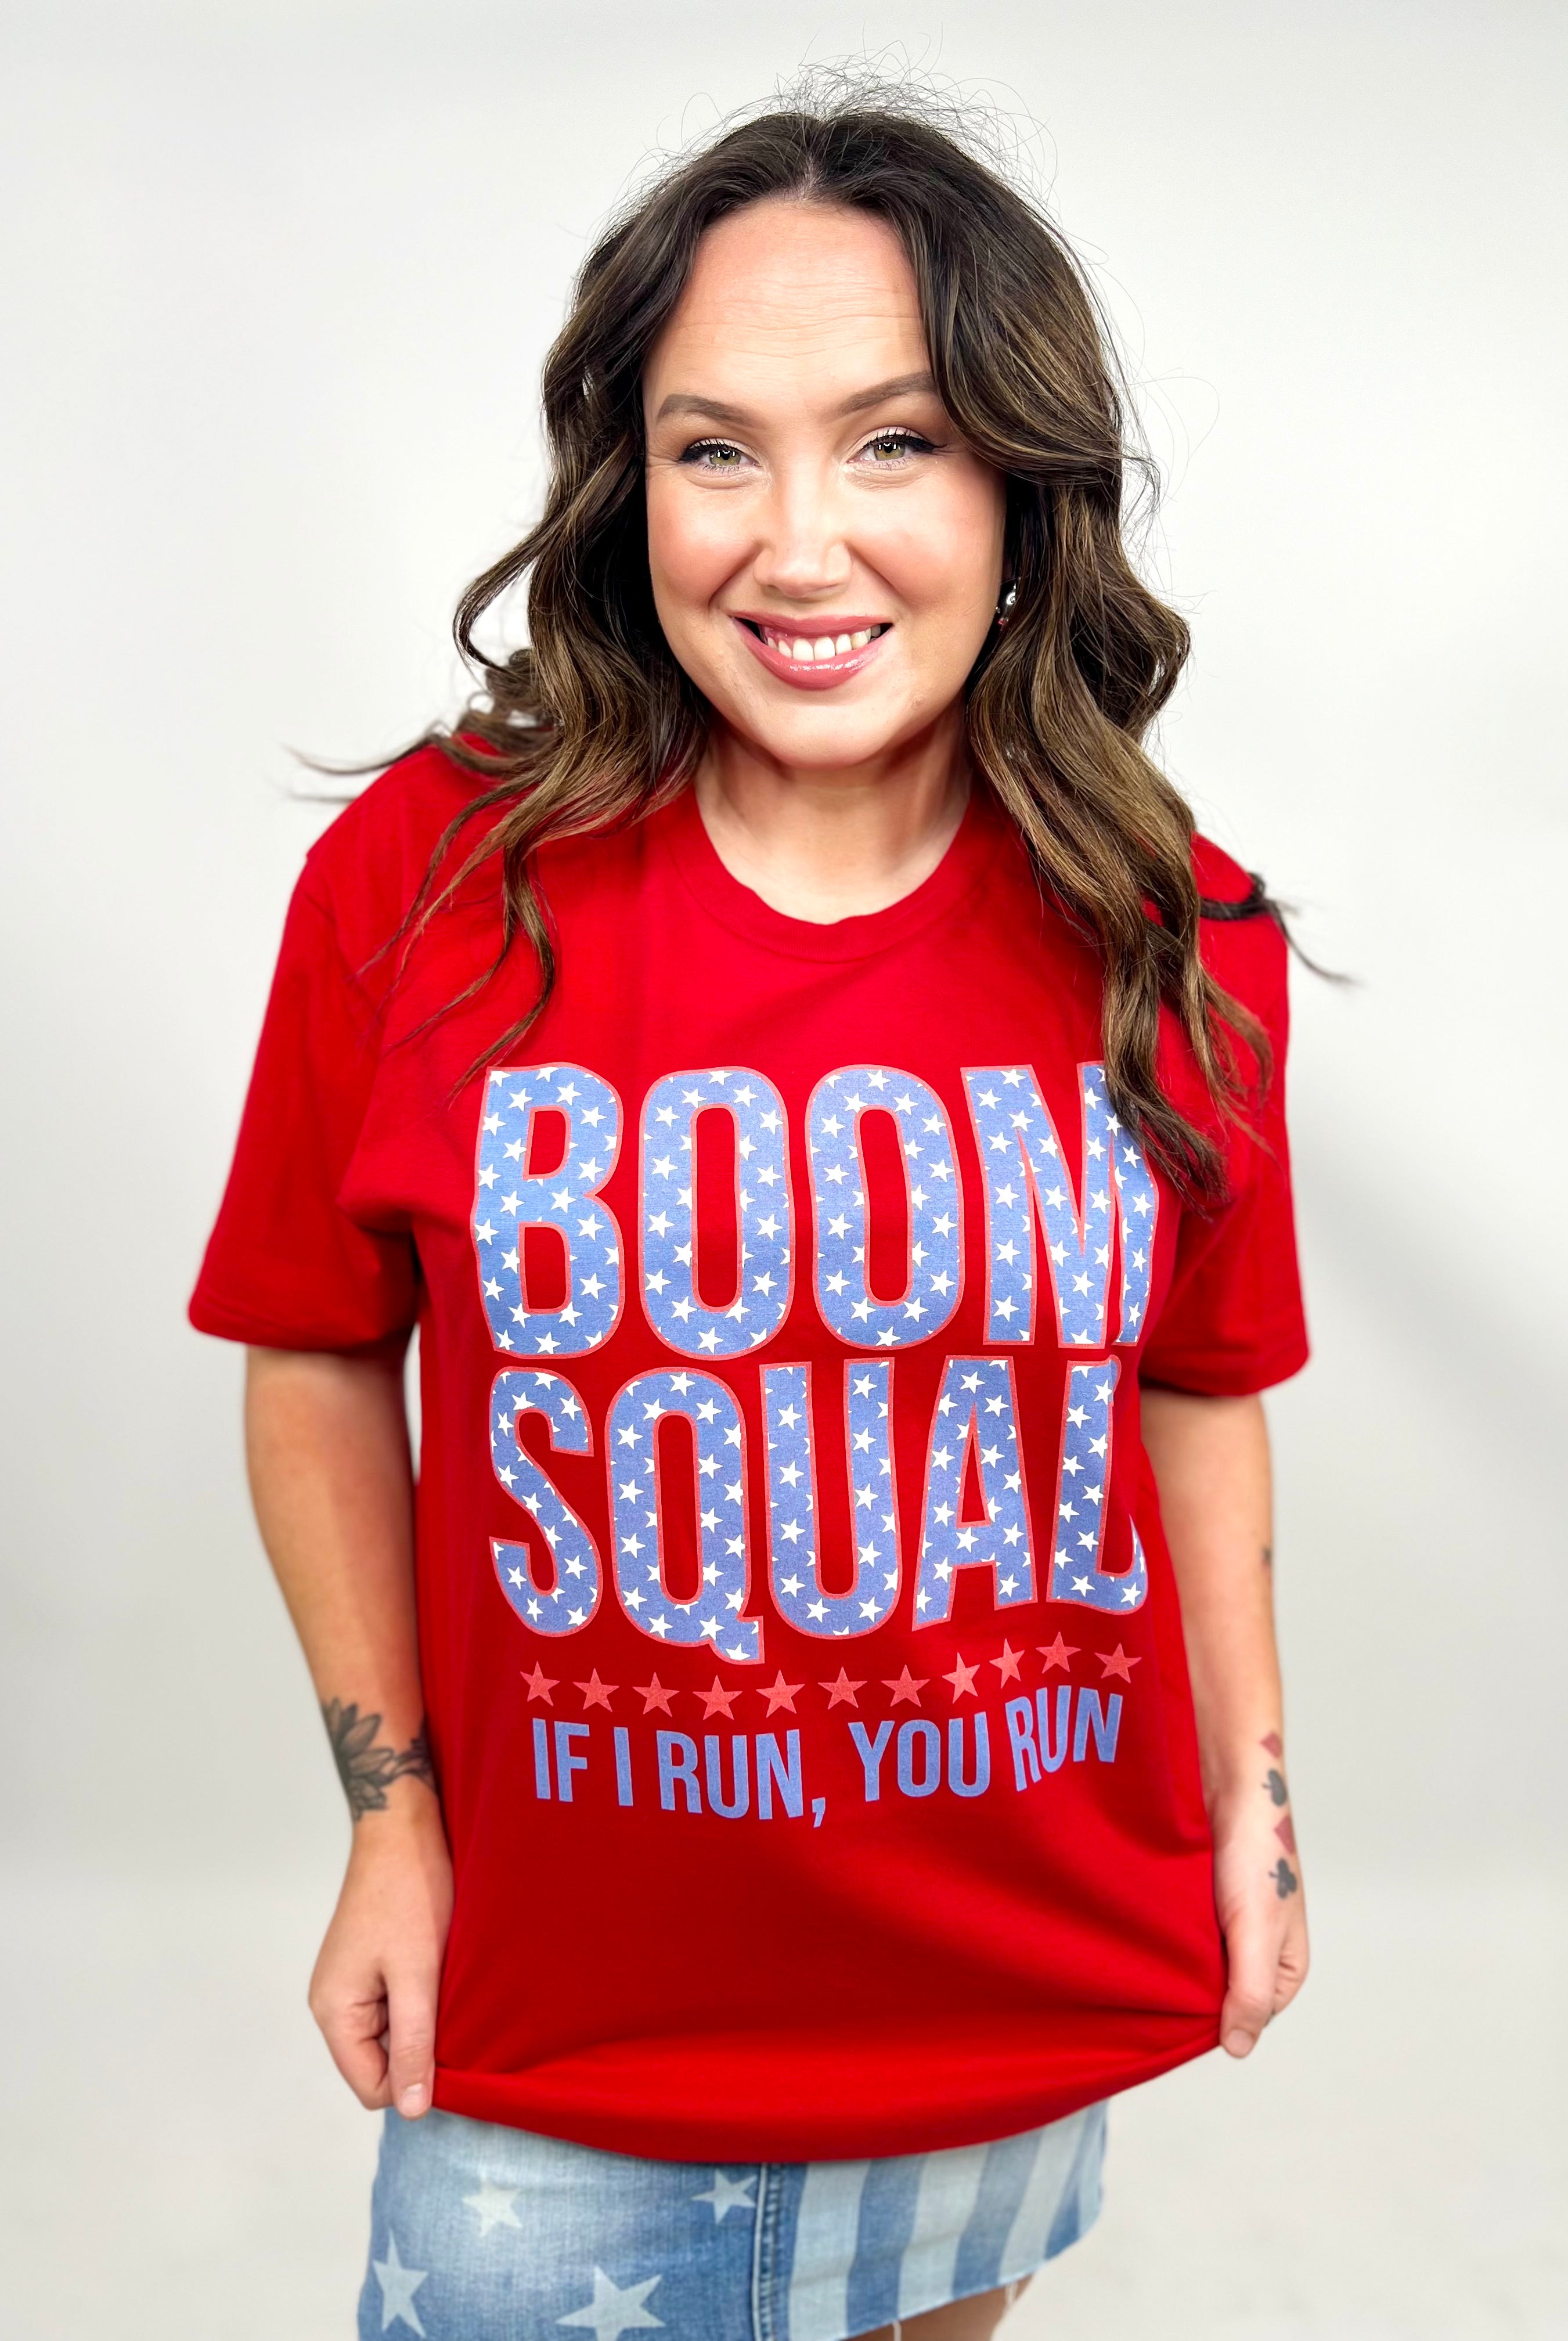 Boom Squad Graphic Tee-130 Graphic Tees-Heathered Boho-Heathered Boho Boutique, Women's Fashion and Accessories in Palmetto, FL